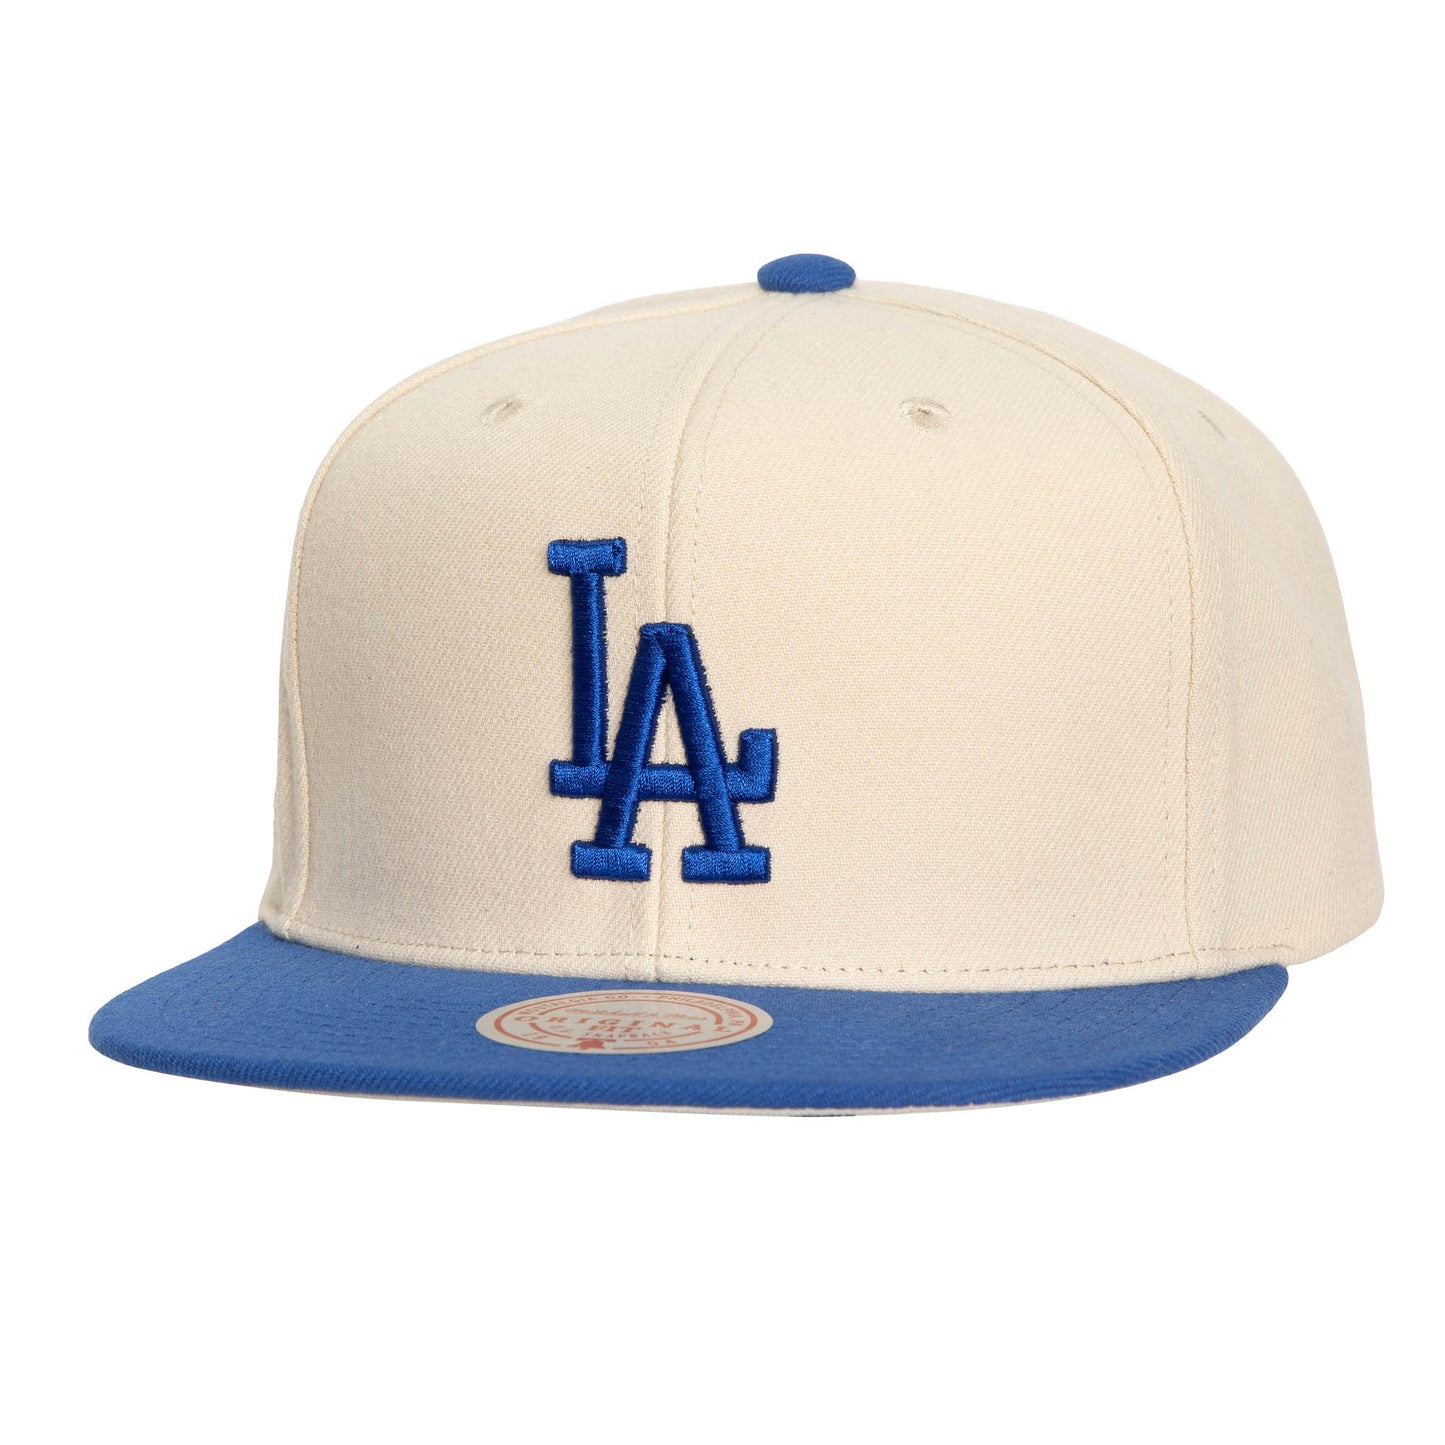 Los Angeles Dodgers Mitchell & Ness Military Blue Anniversary Snap Back Hat